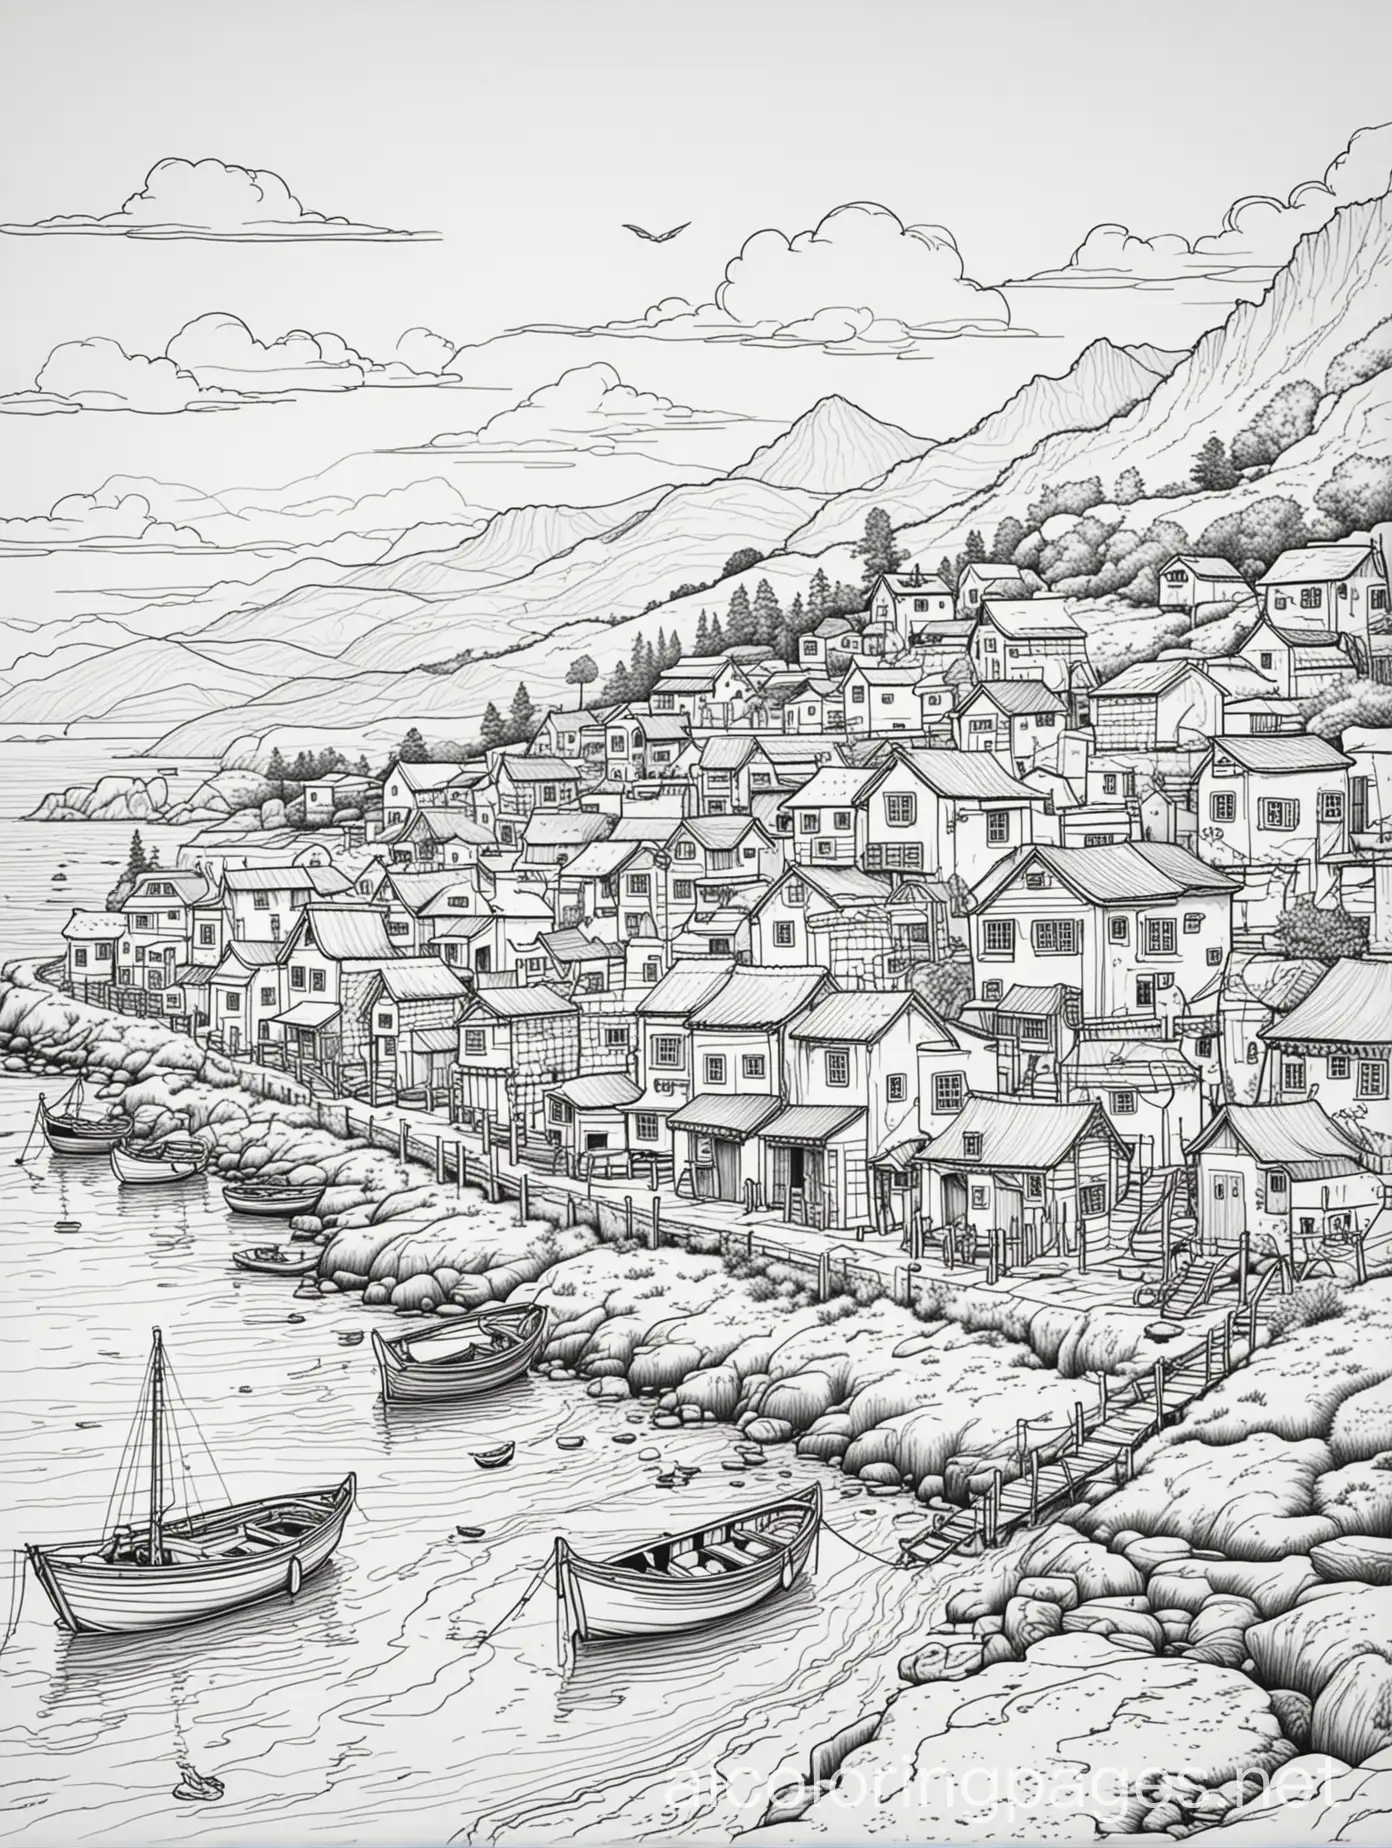 a black and white line drawing of a fishing village, coloring page, ample white space, bold lines easy for kids to color inside the lines, Coloring Page, black and white, line art, white background, Simplicity, Ample White Space. The background of the coloring page is plain white to make it easy for young children to color within the lines. The outlines of all the subjects are easy to distinguish, making it simple for kids to color without too much difficulty, Coloring Page, black and white, line art, white background, Simplicity, Ample White Space. The background of the coloring page is plain white to make it easy for young children to color within the lines. The outlines of all the subjects are easy to distinguish, making it simple for kids to color without too much difficulty